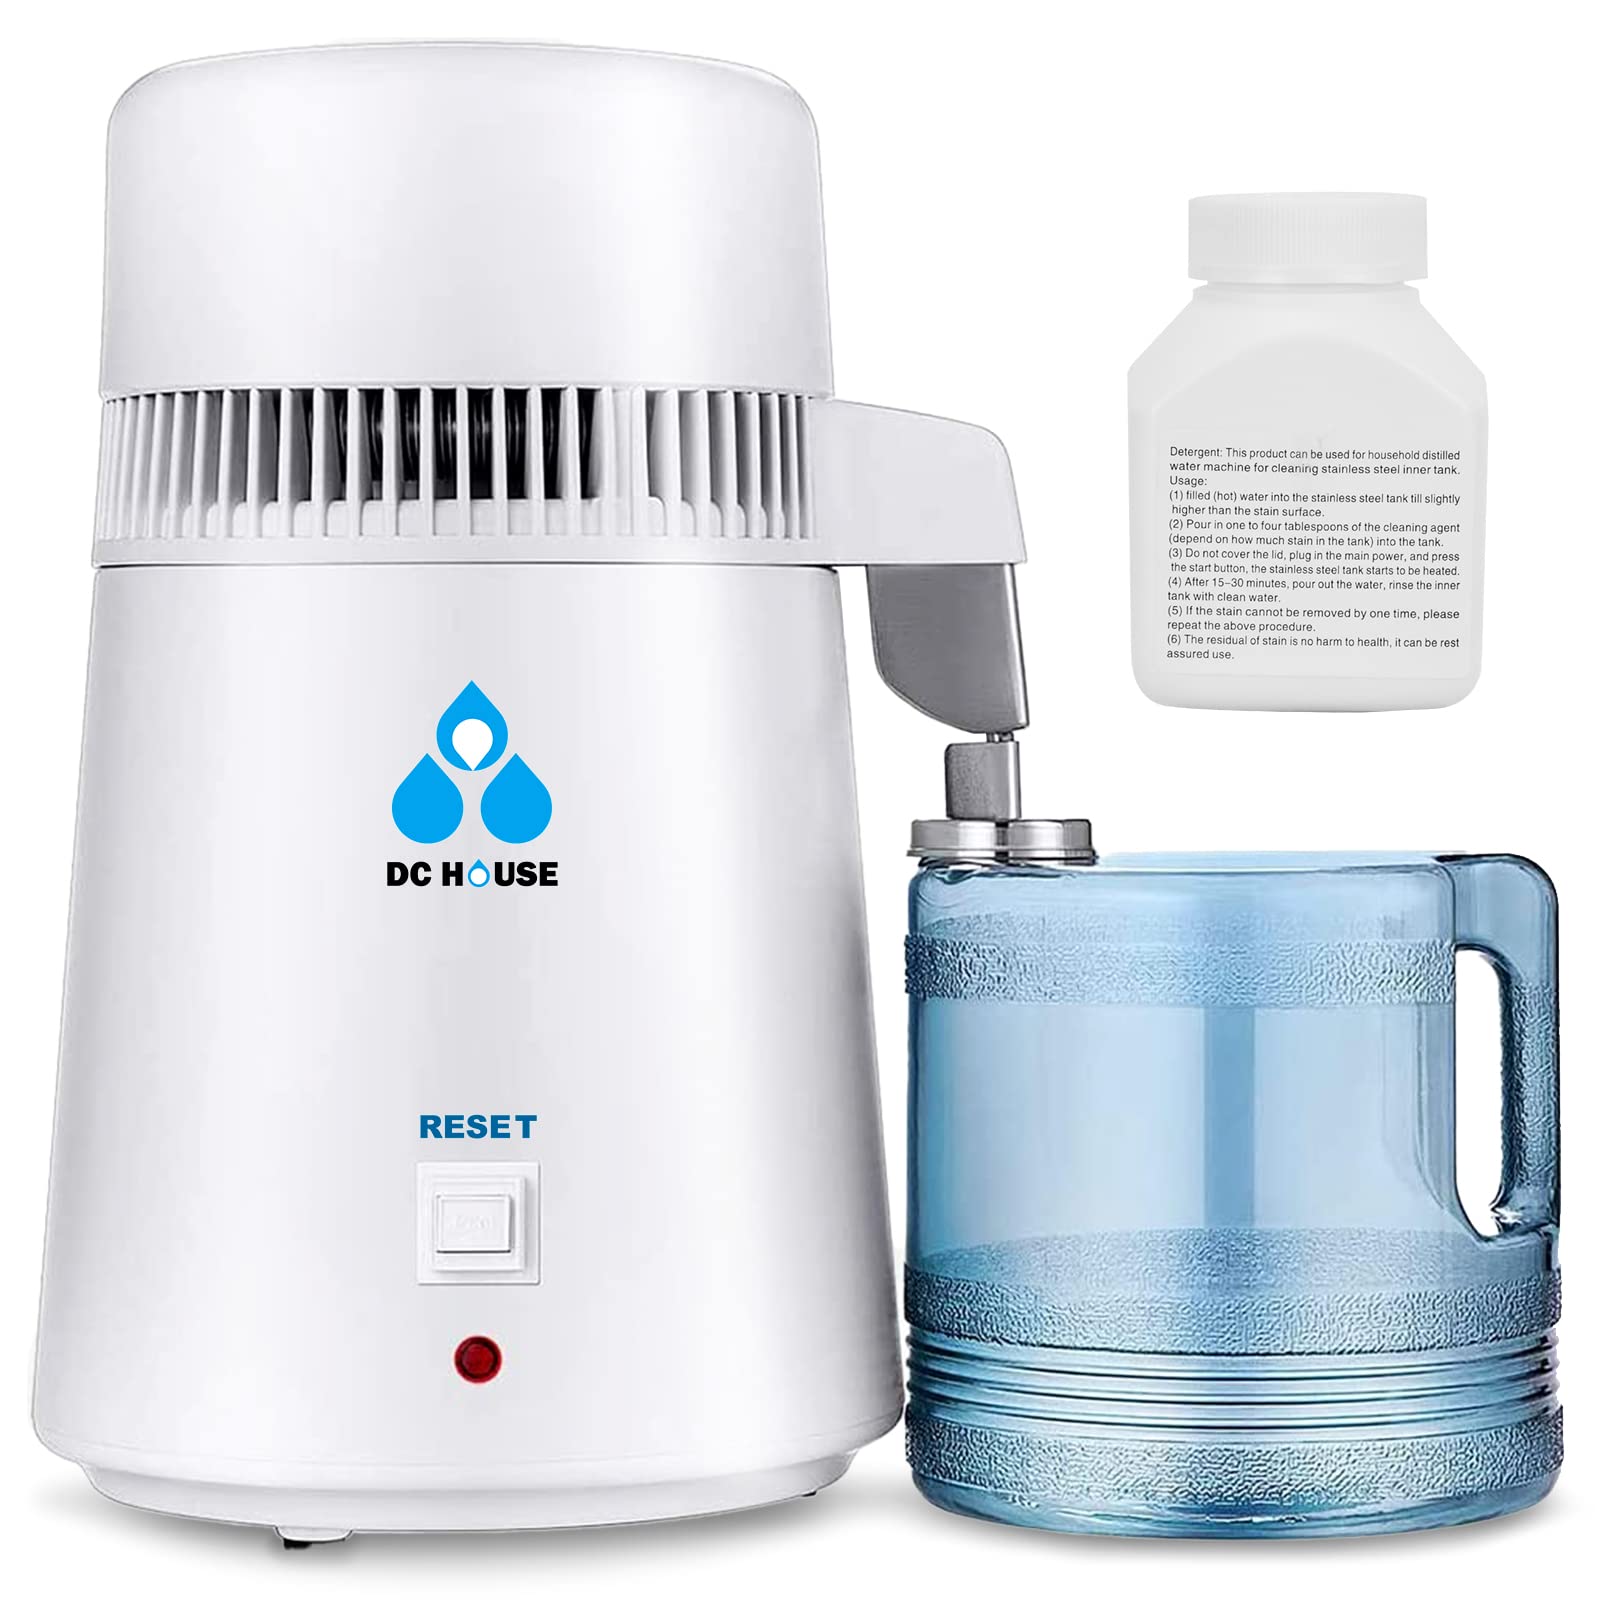 DC House 1 Gallon Water Distiller Machine, 750W, 4L Distilled Water for Home Countertop Table Desktop, Stainless Steel